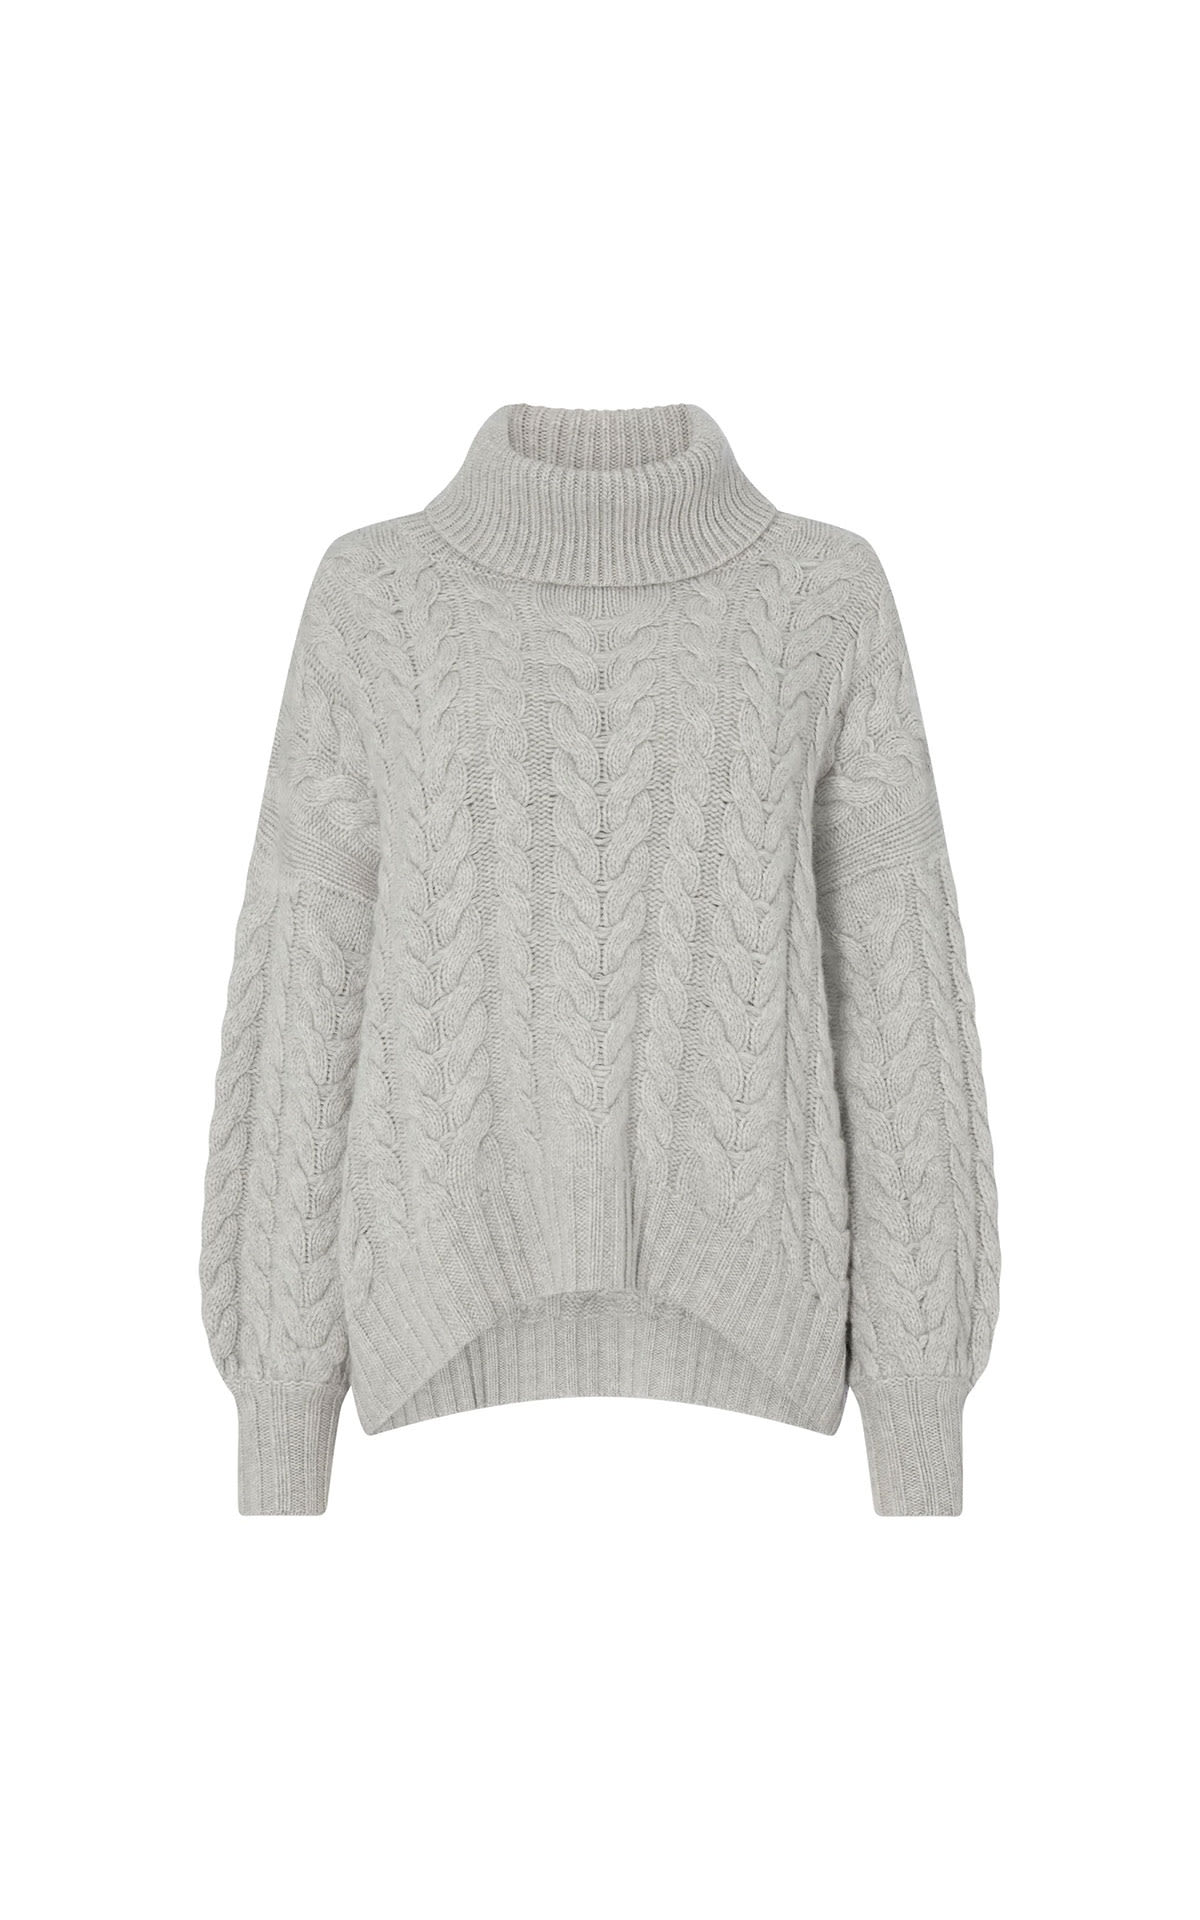 N. Peal Super chunky cable cashmere jumper from Bicester Village